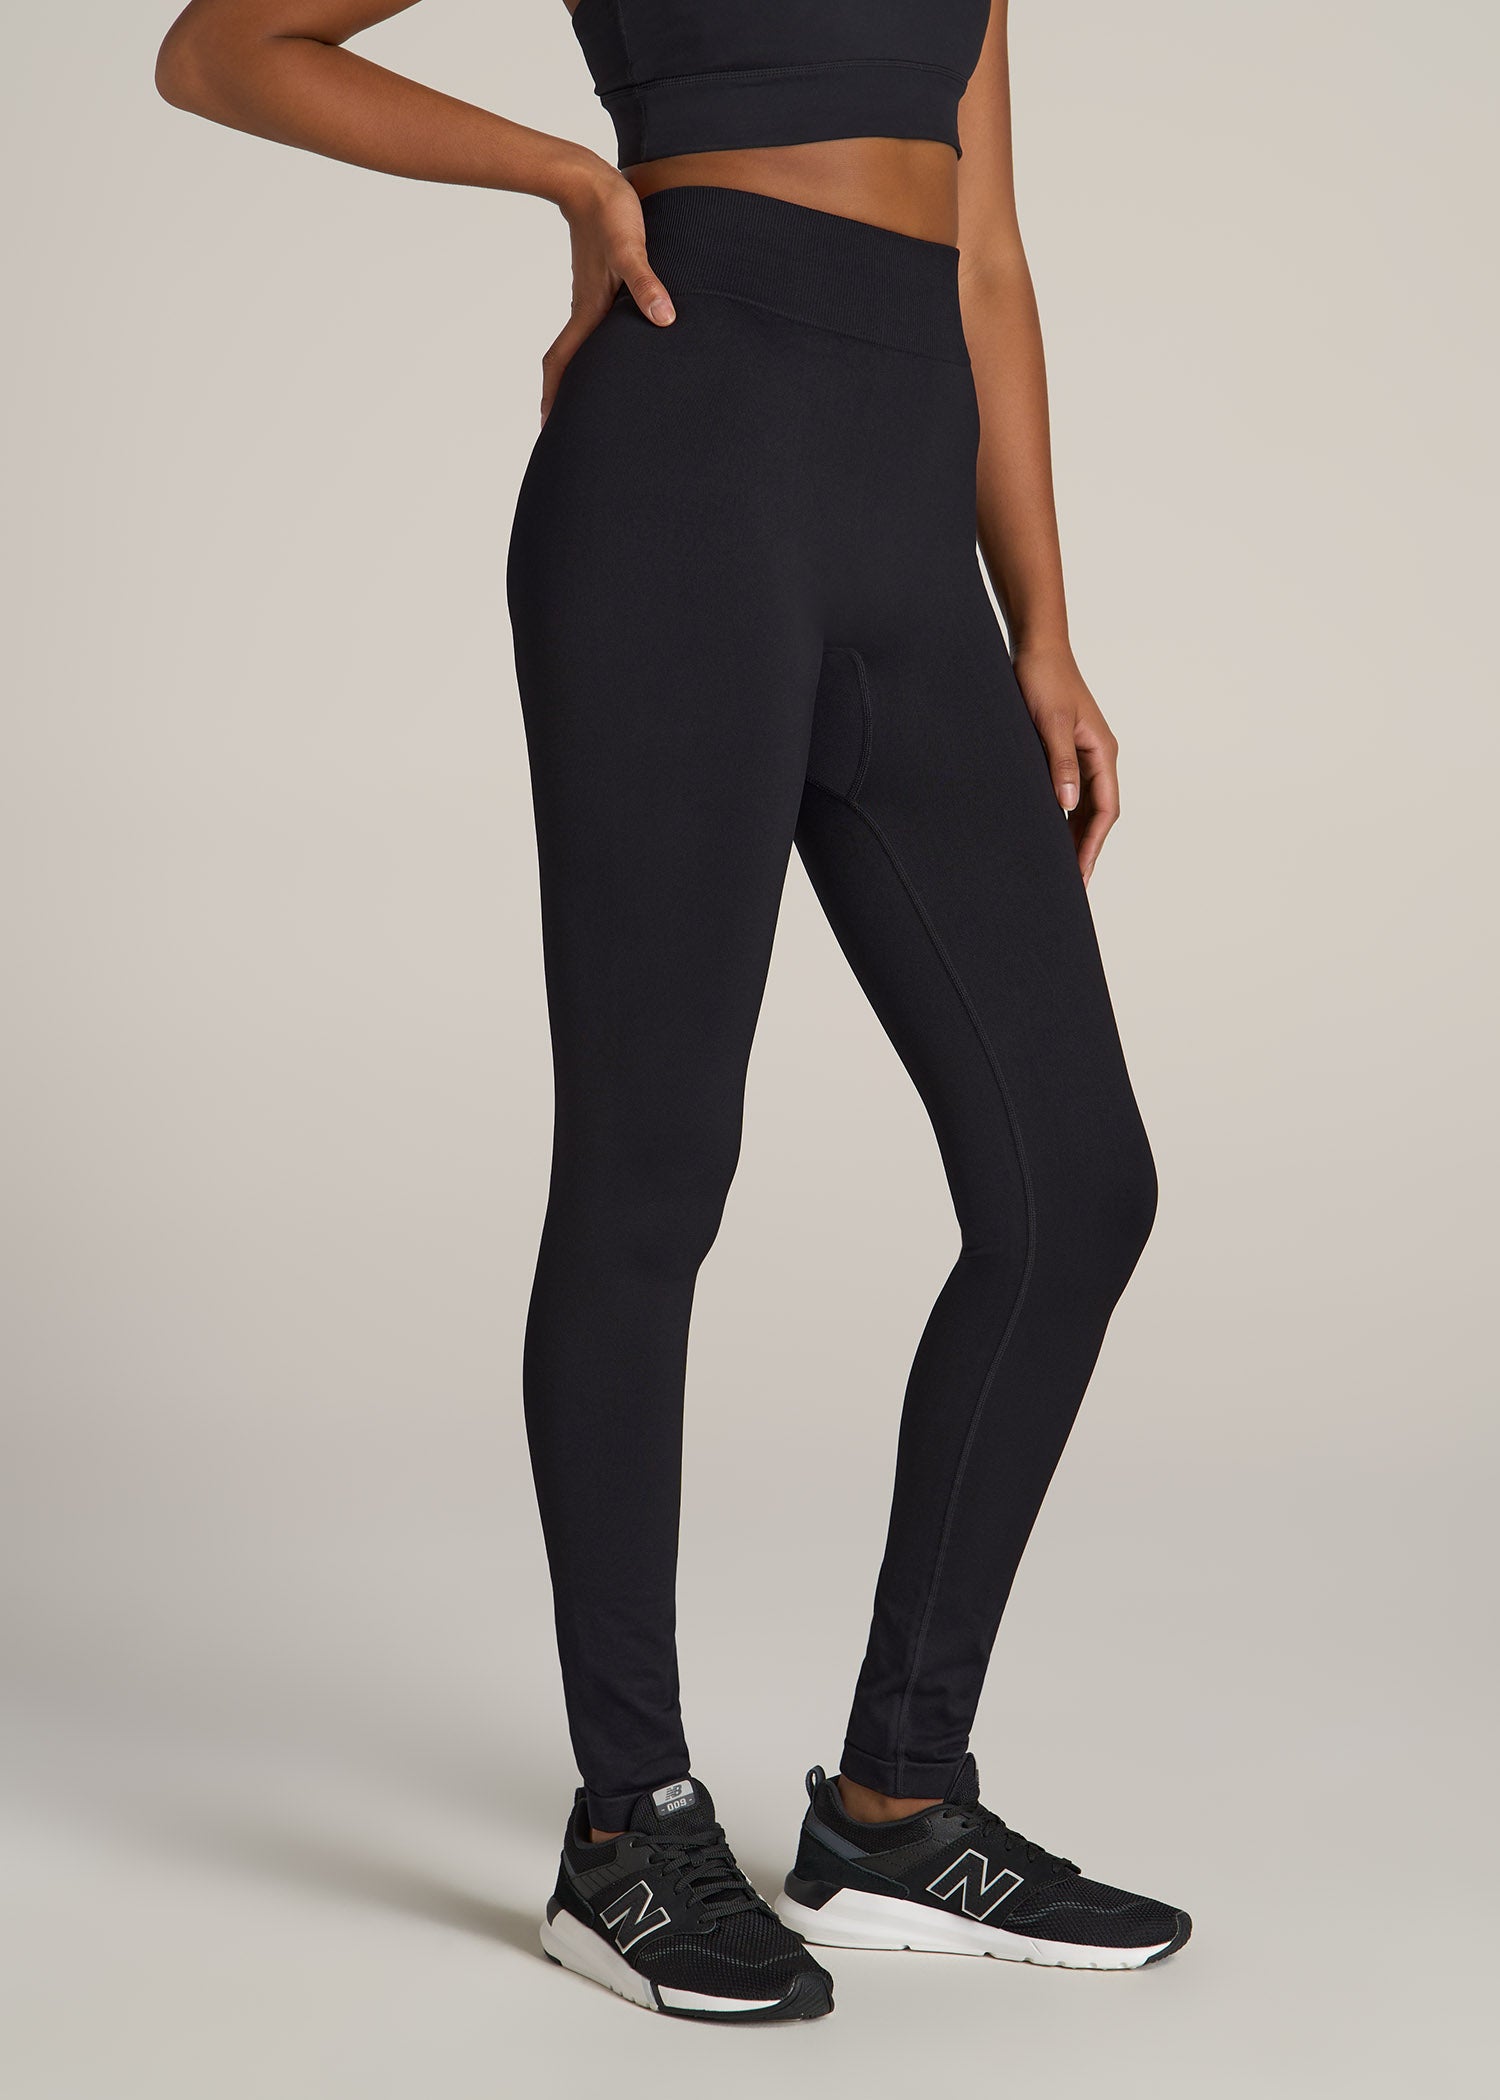 Lululemon athletica Limited Edition Fast and Free High-Rise Tight